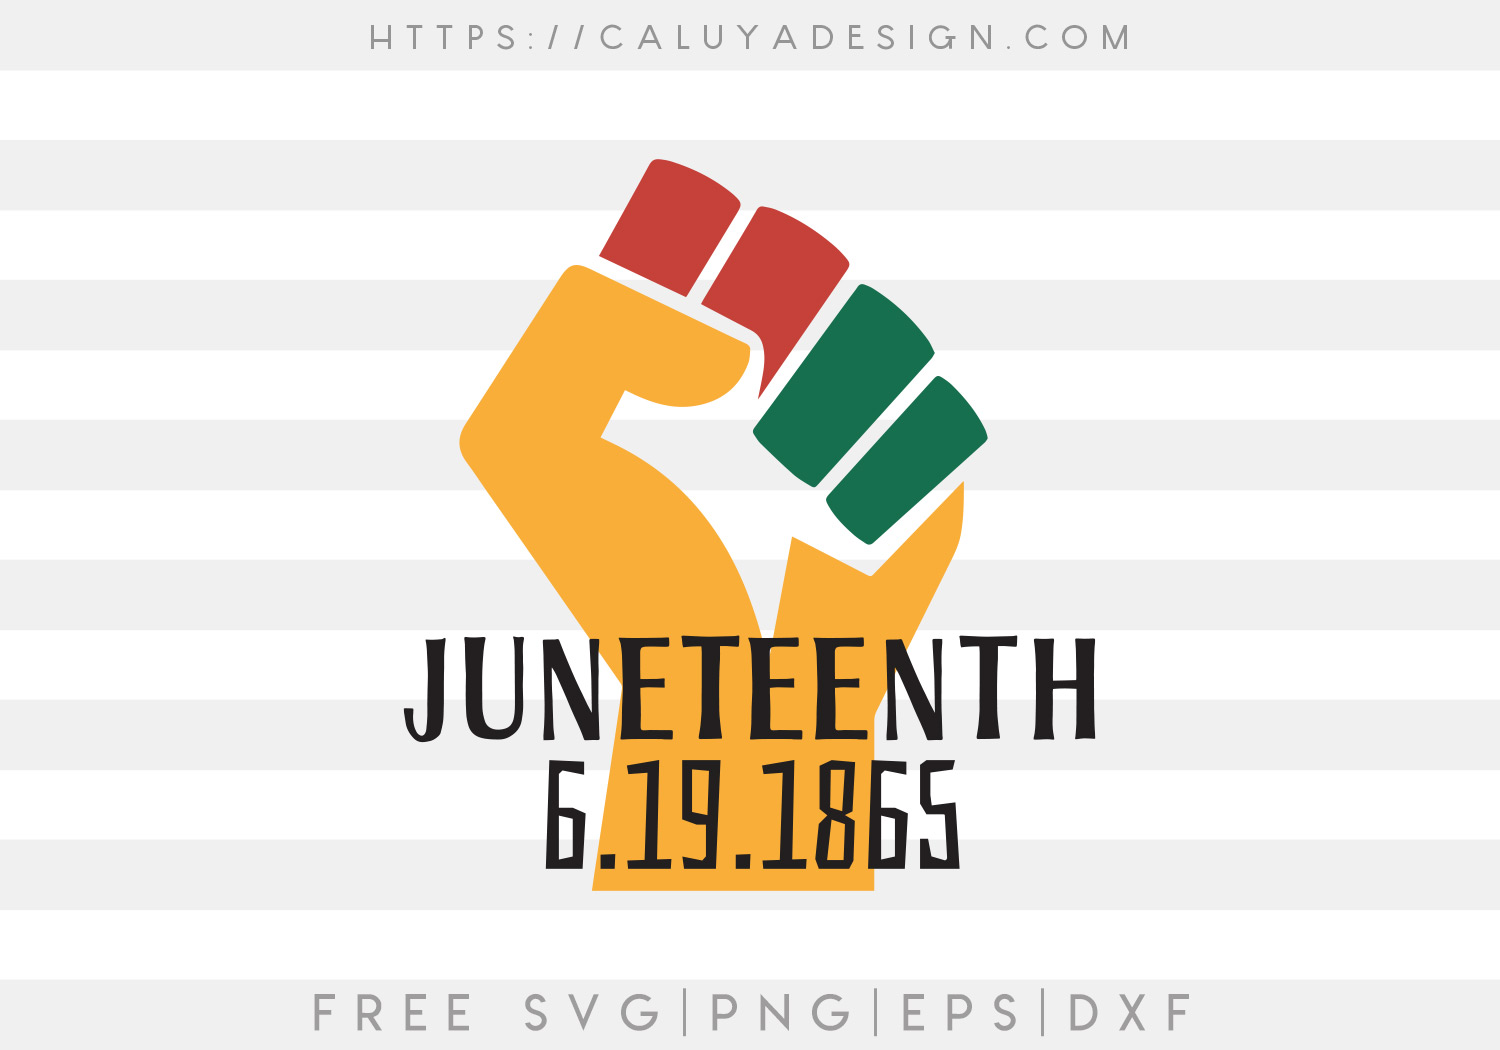 Free Free Svg Files Peace Love Juneteenth Png